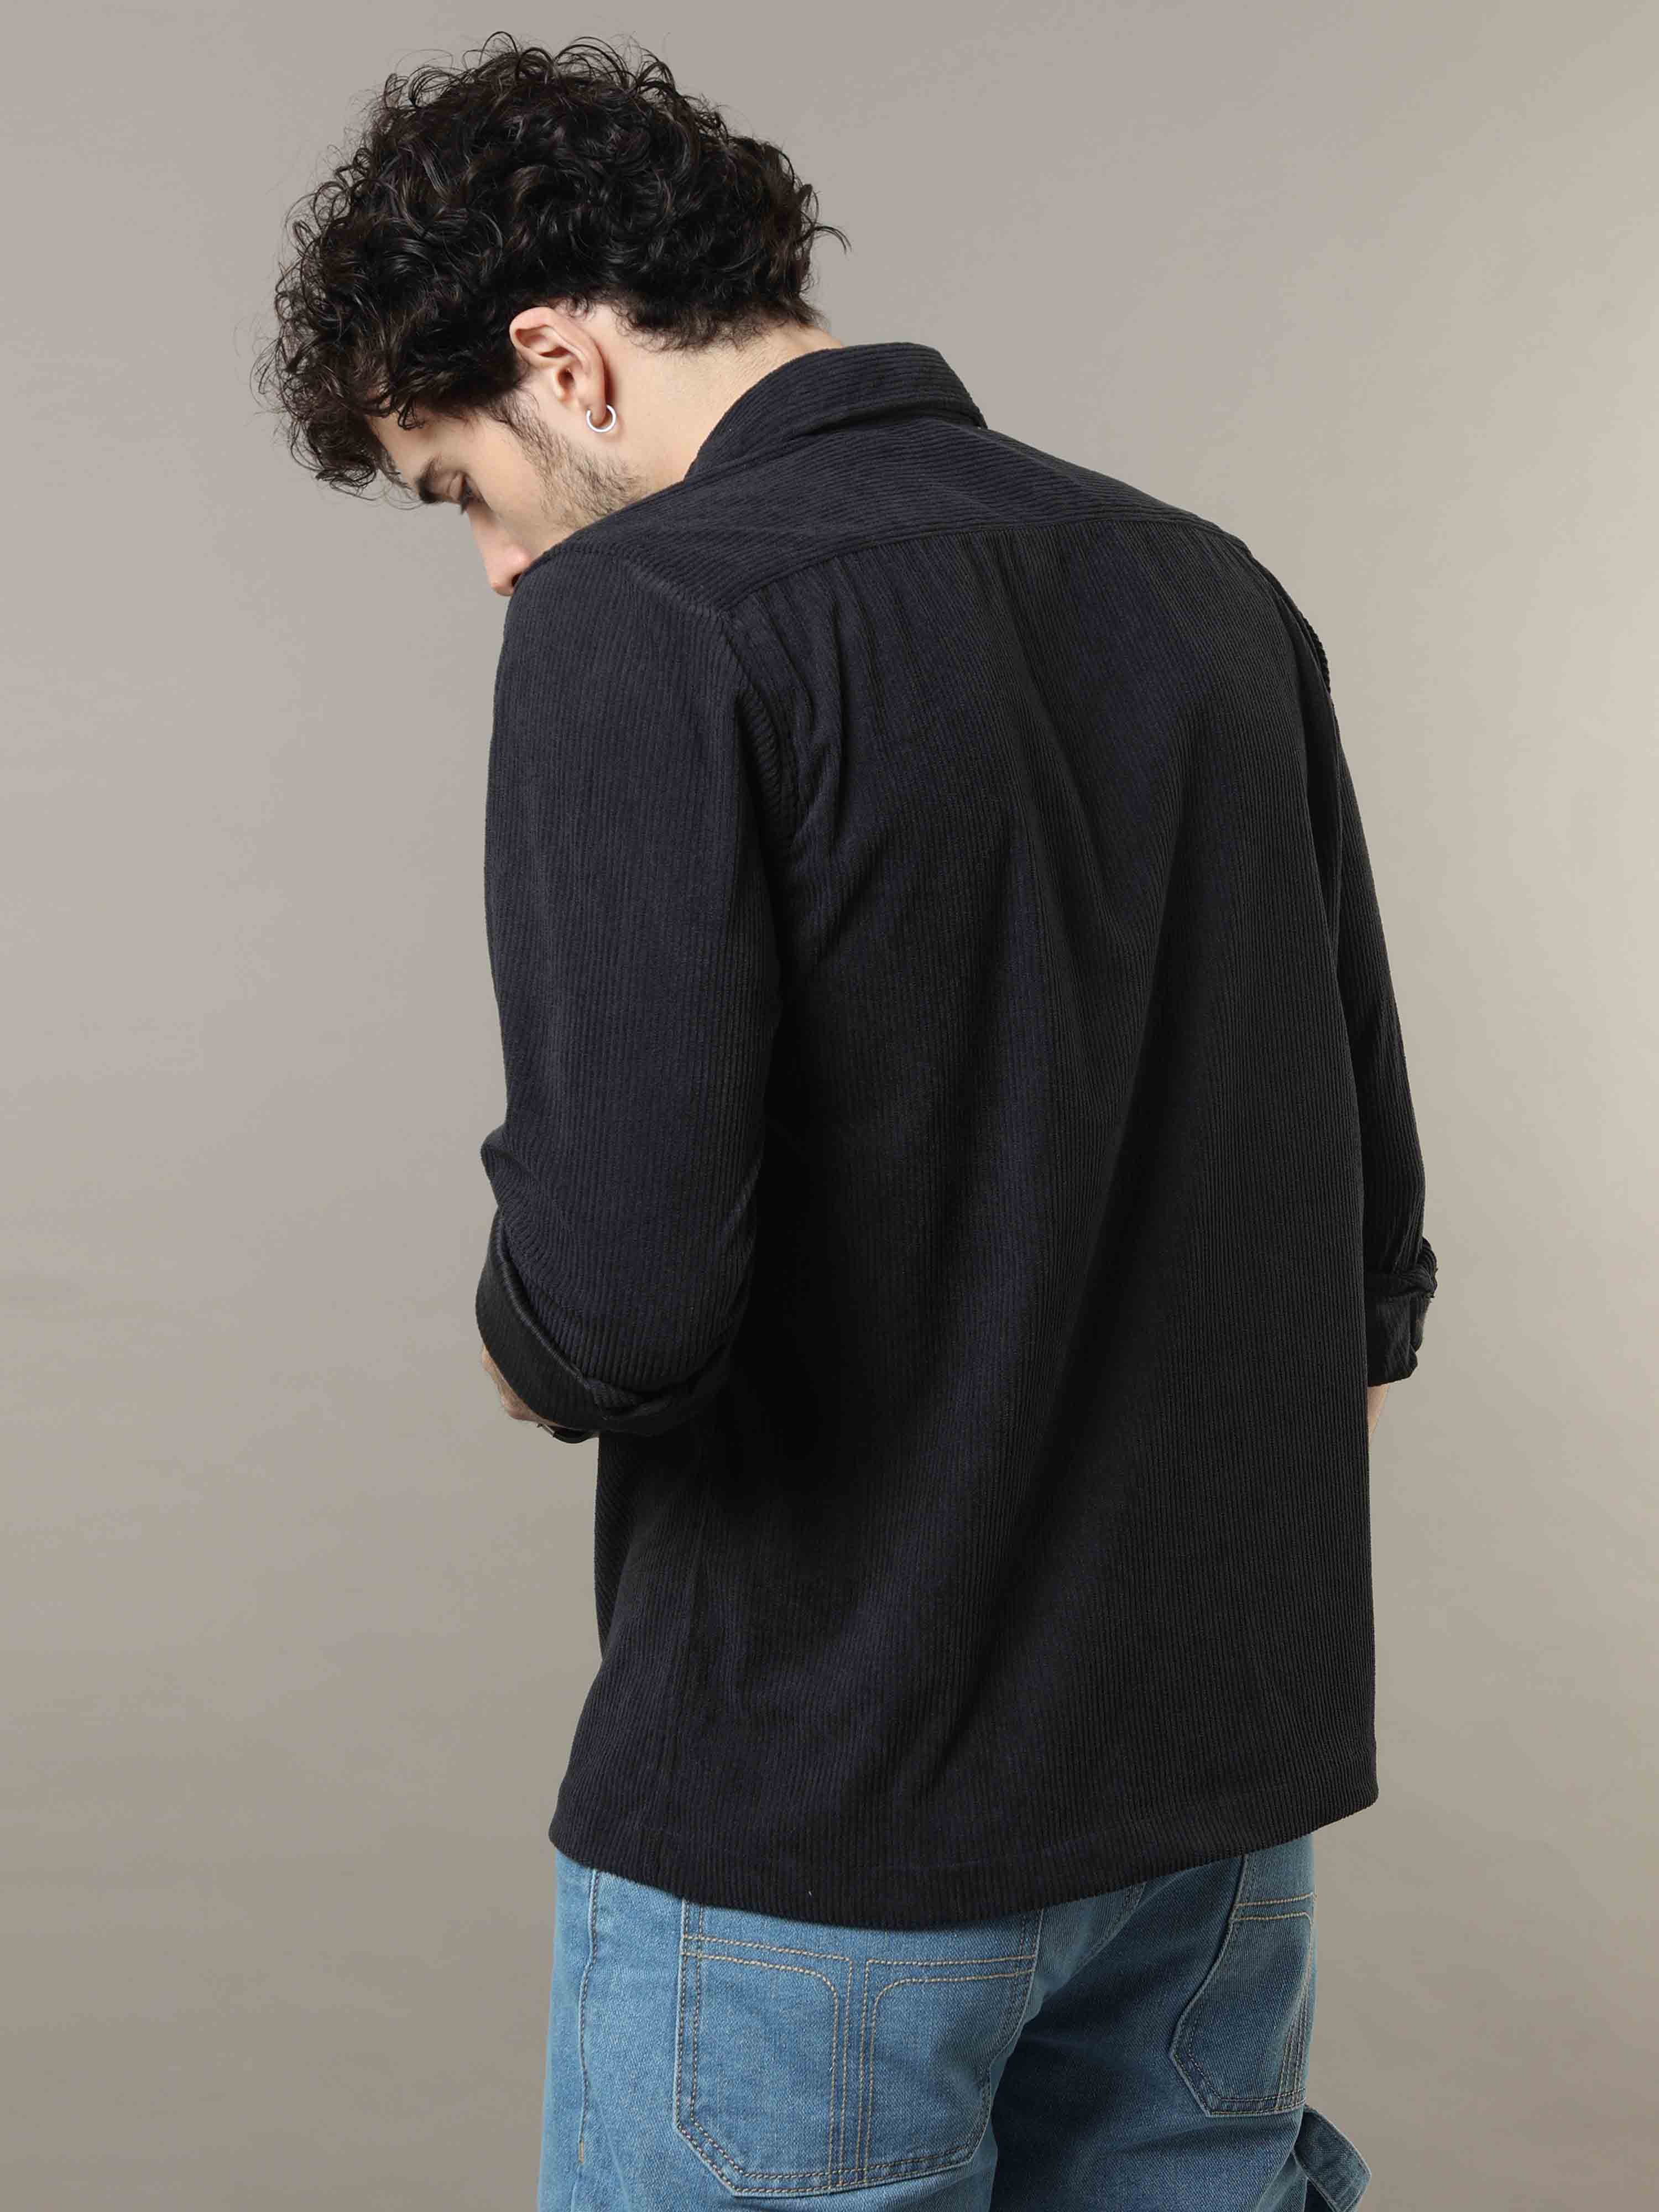 Graphite Corduroy Double Pocket with Contrast Patch Shirt 